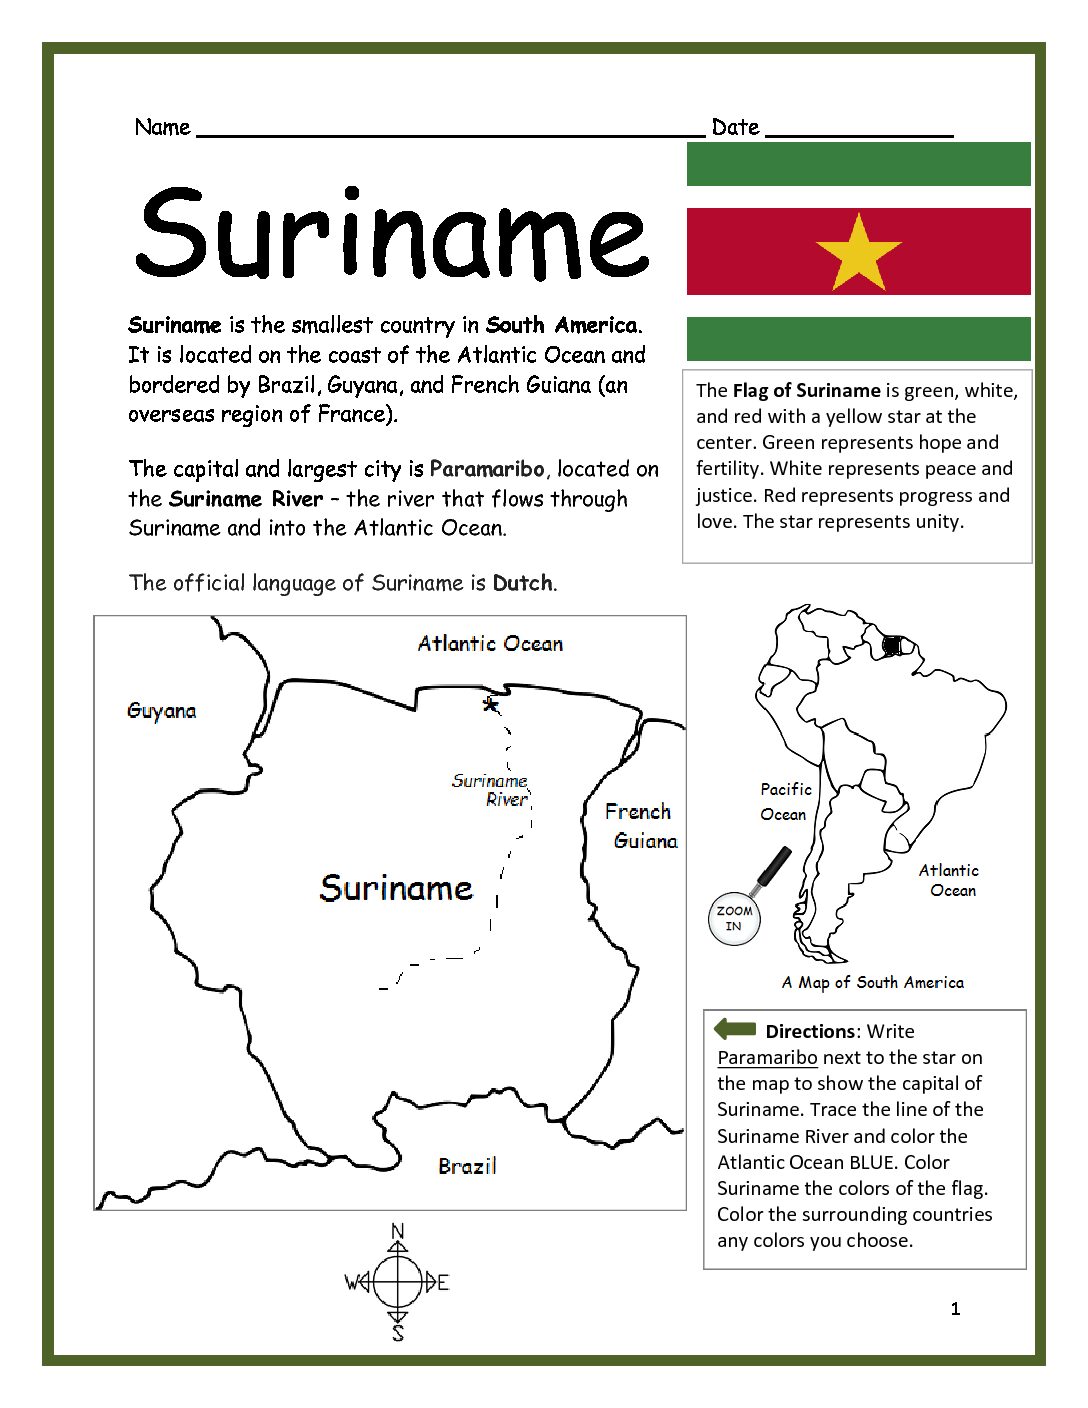 Suriname Printable Worksheet with Map and Flag